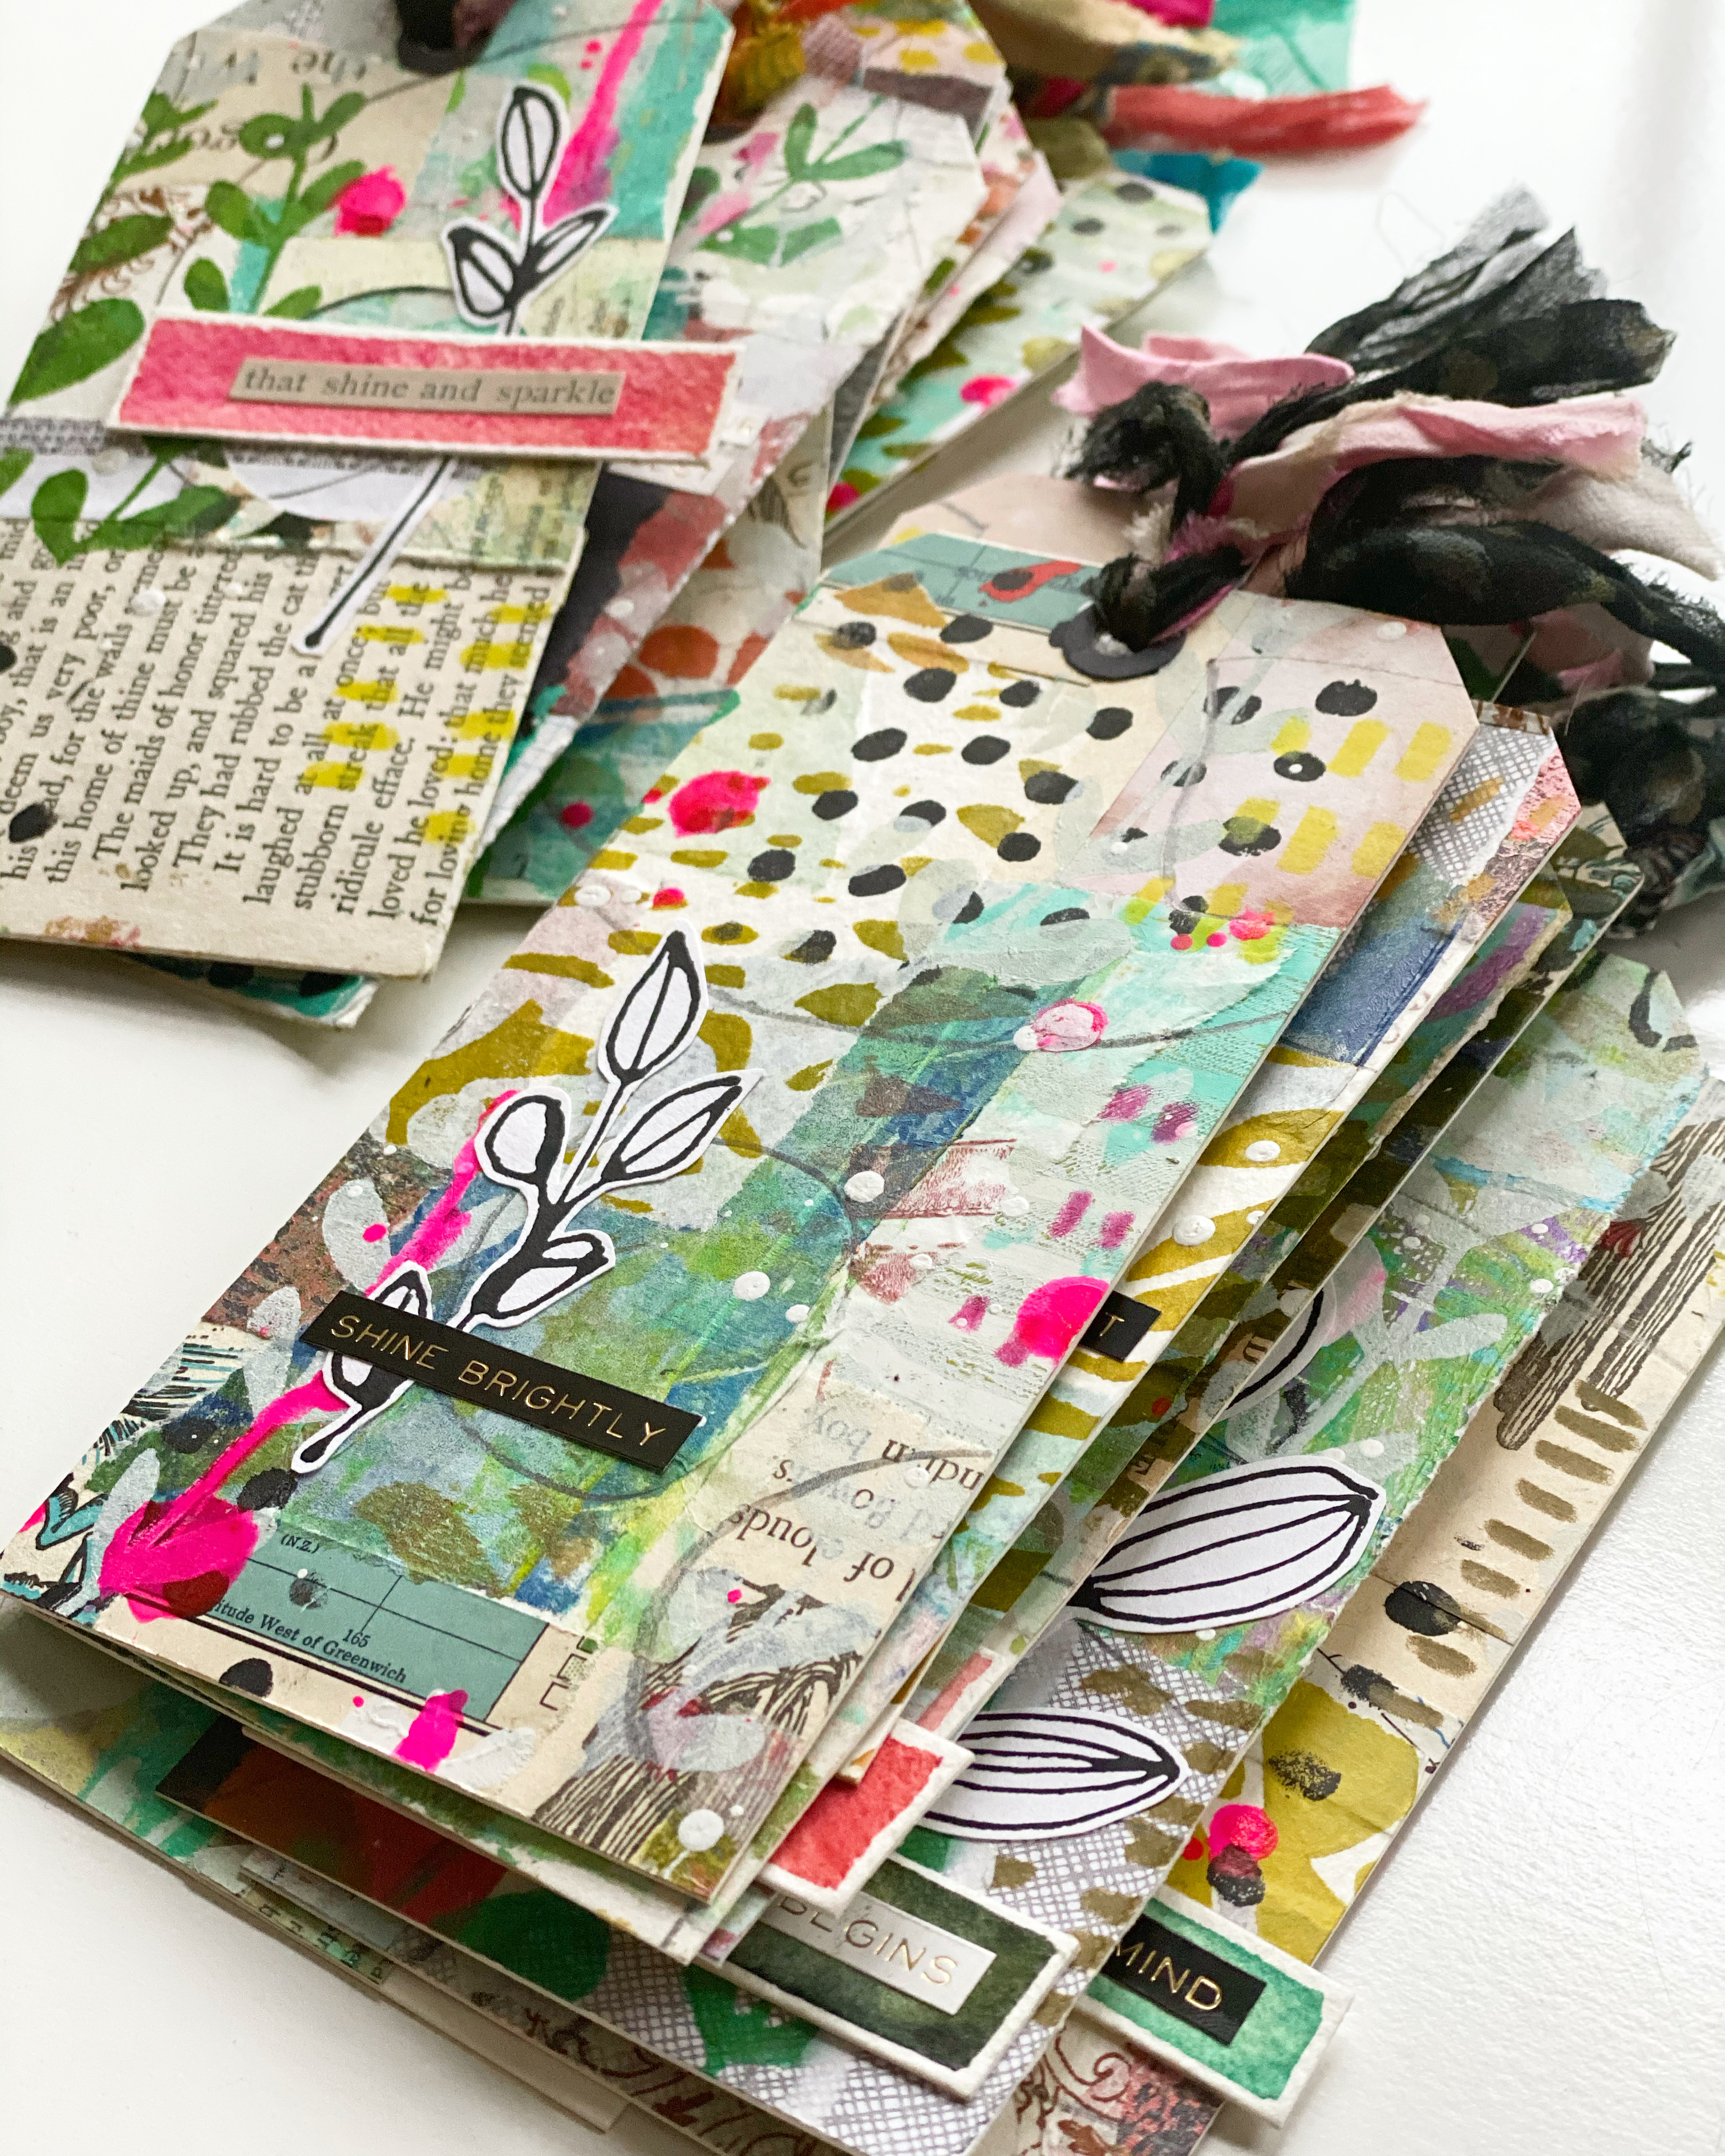 What Pens Do You Use in your Mixed Media Art Journaling? — Willa Wanders